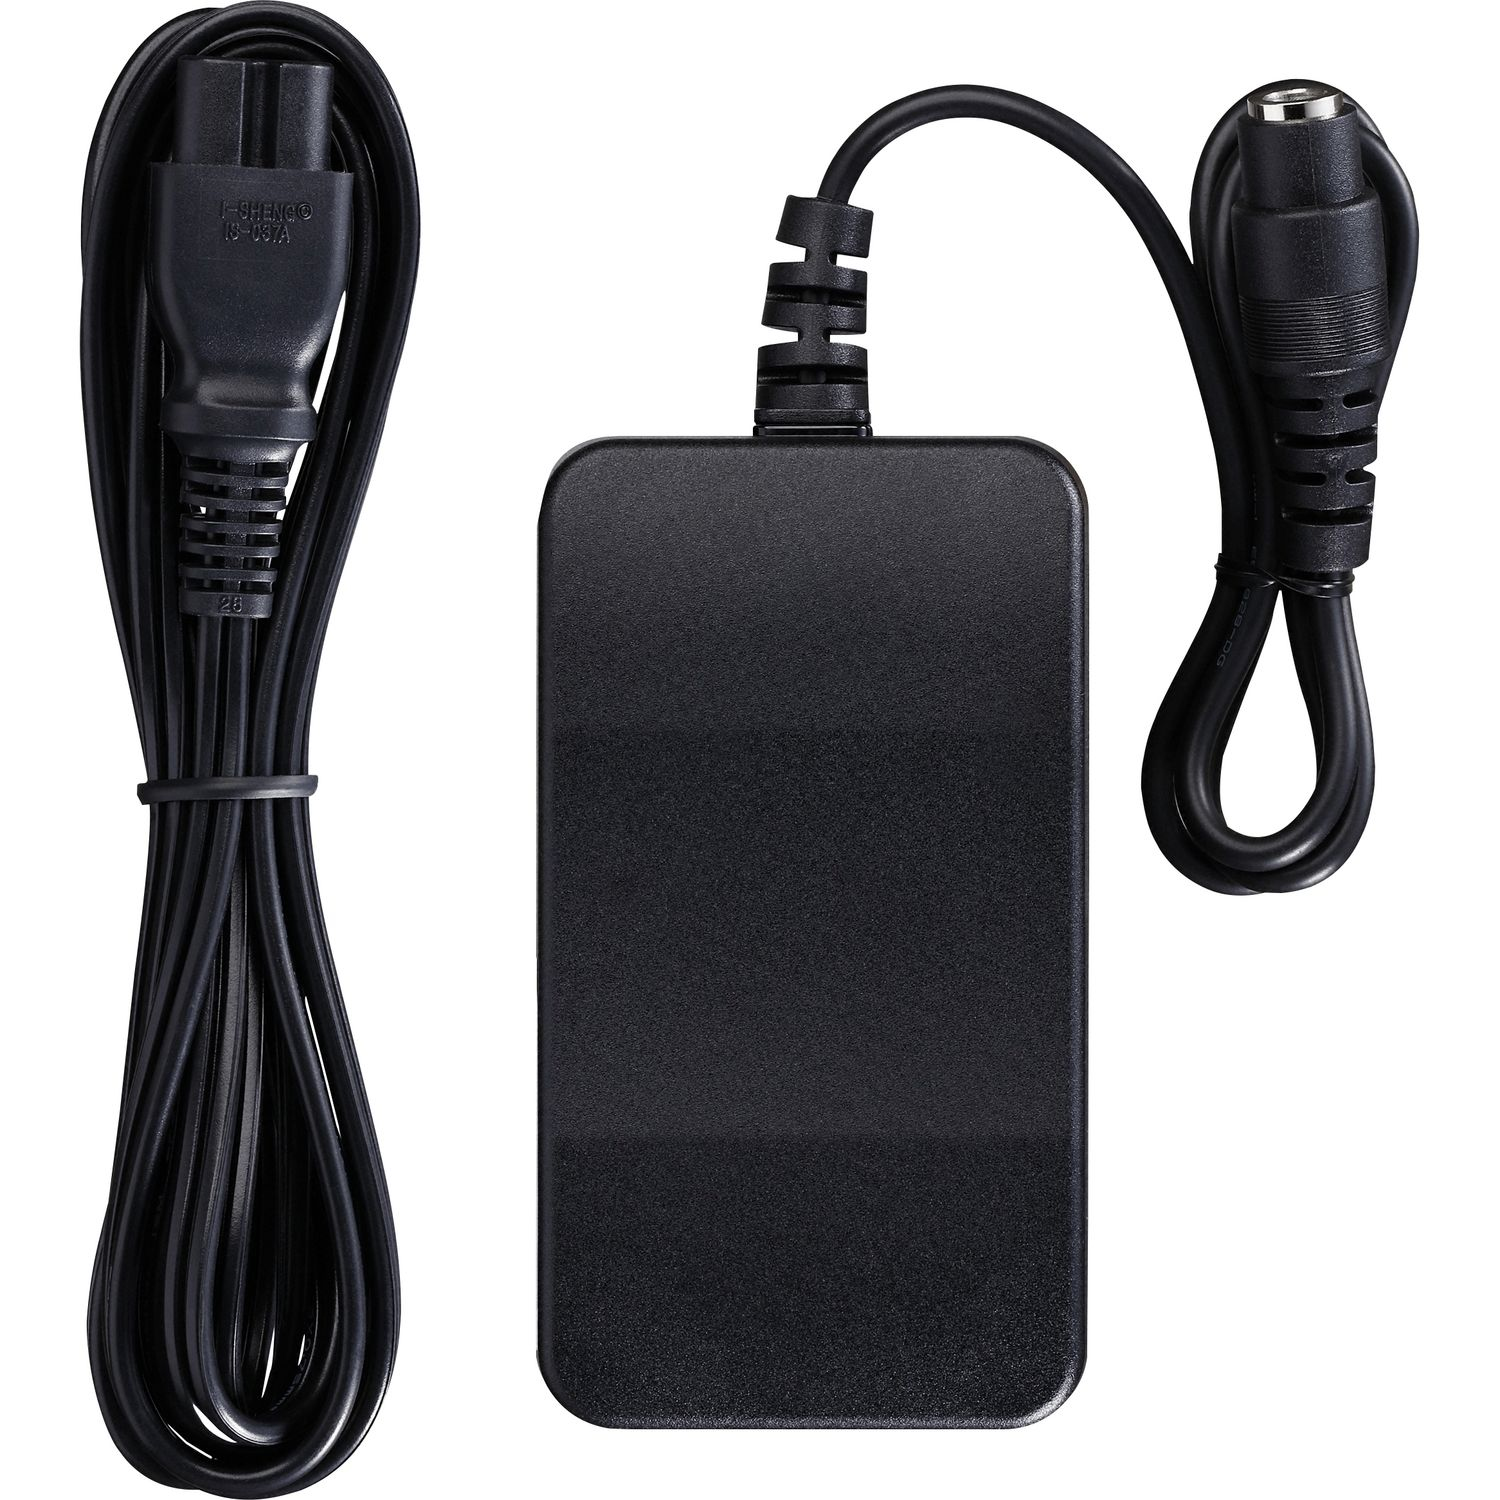 Photos - Laptop Charger Canon 1425C007 power adapter/inverter Black 